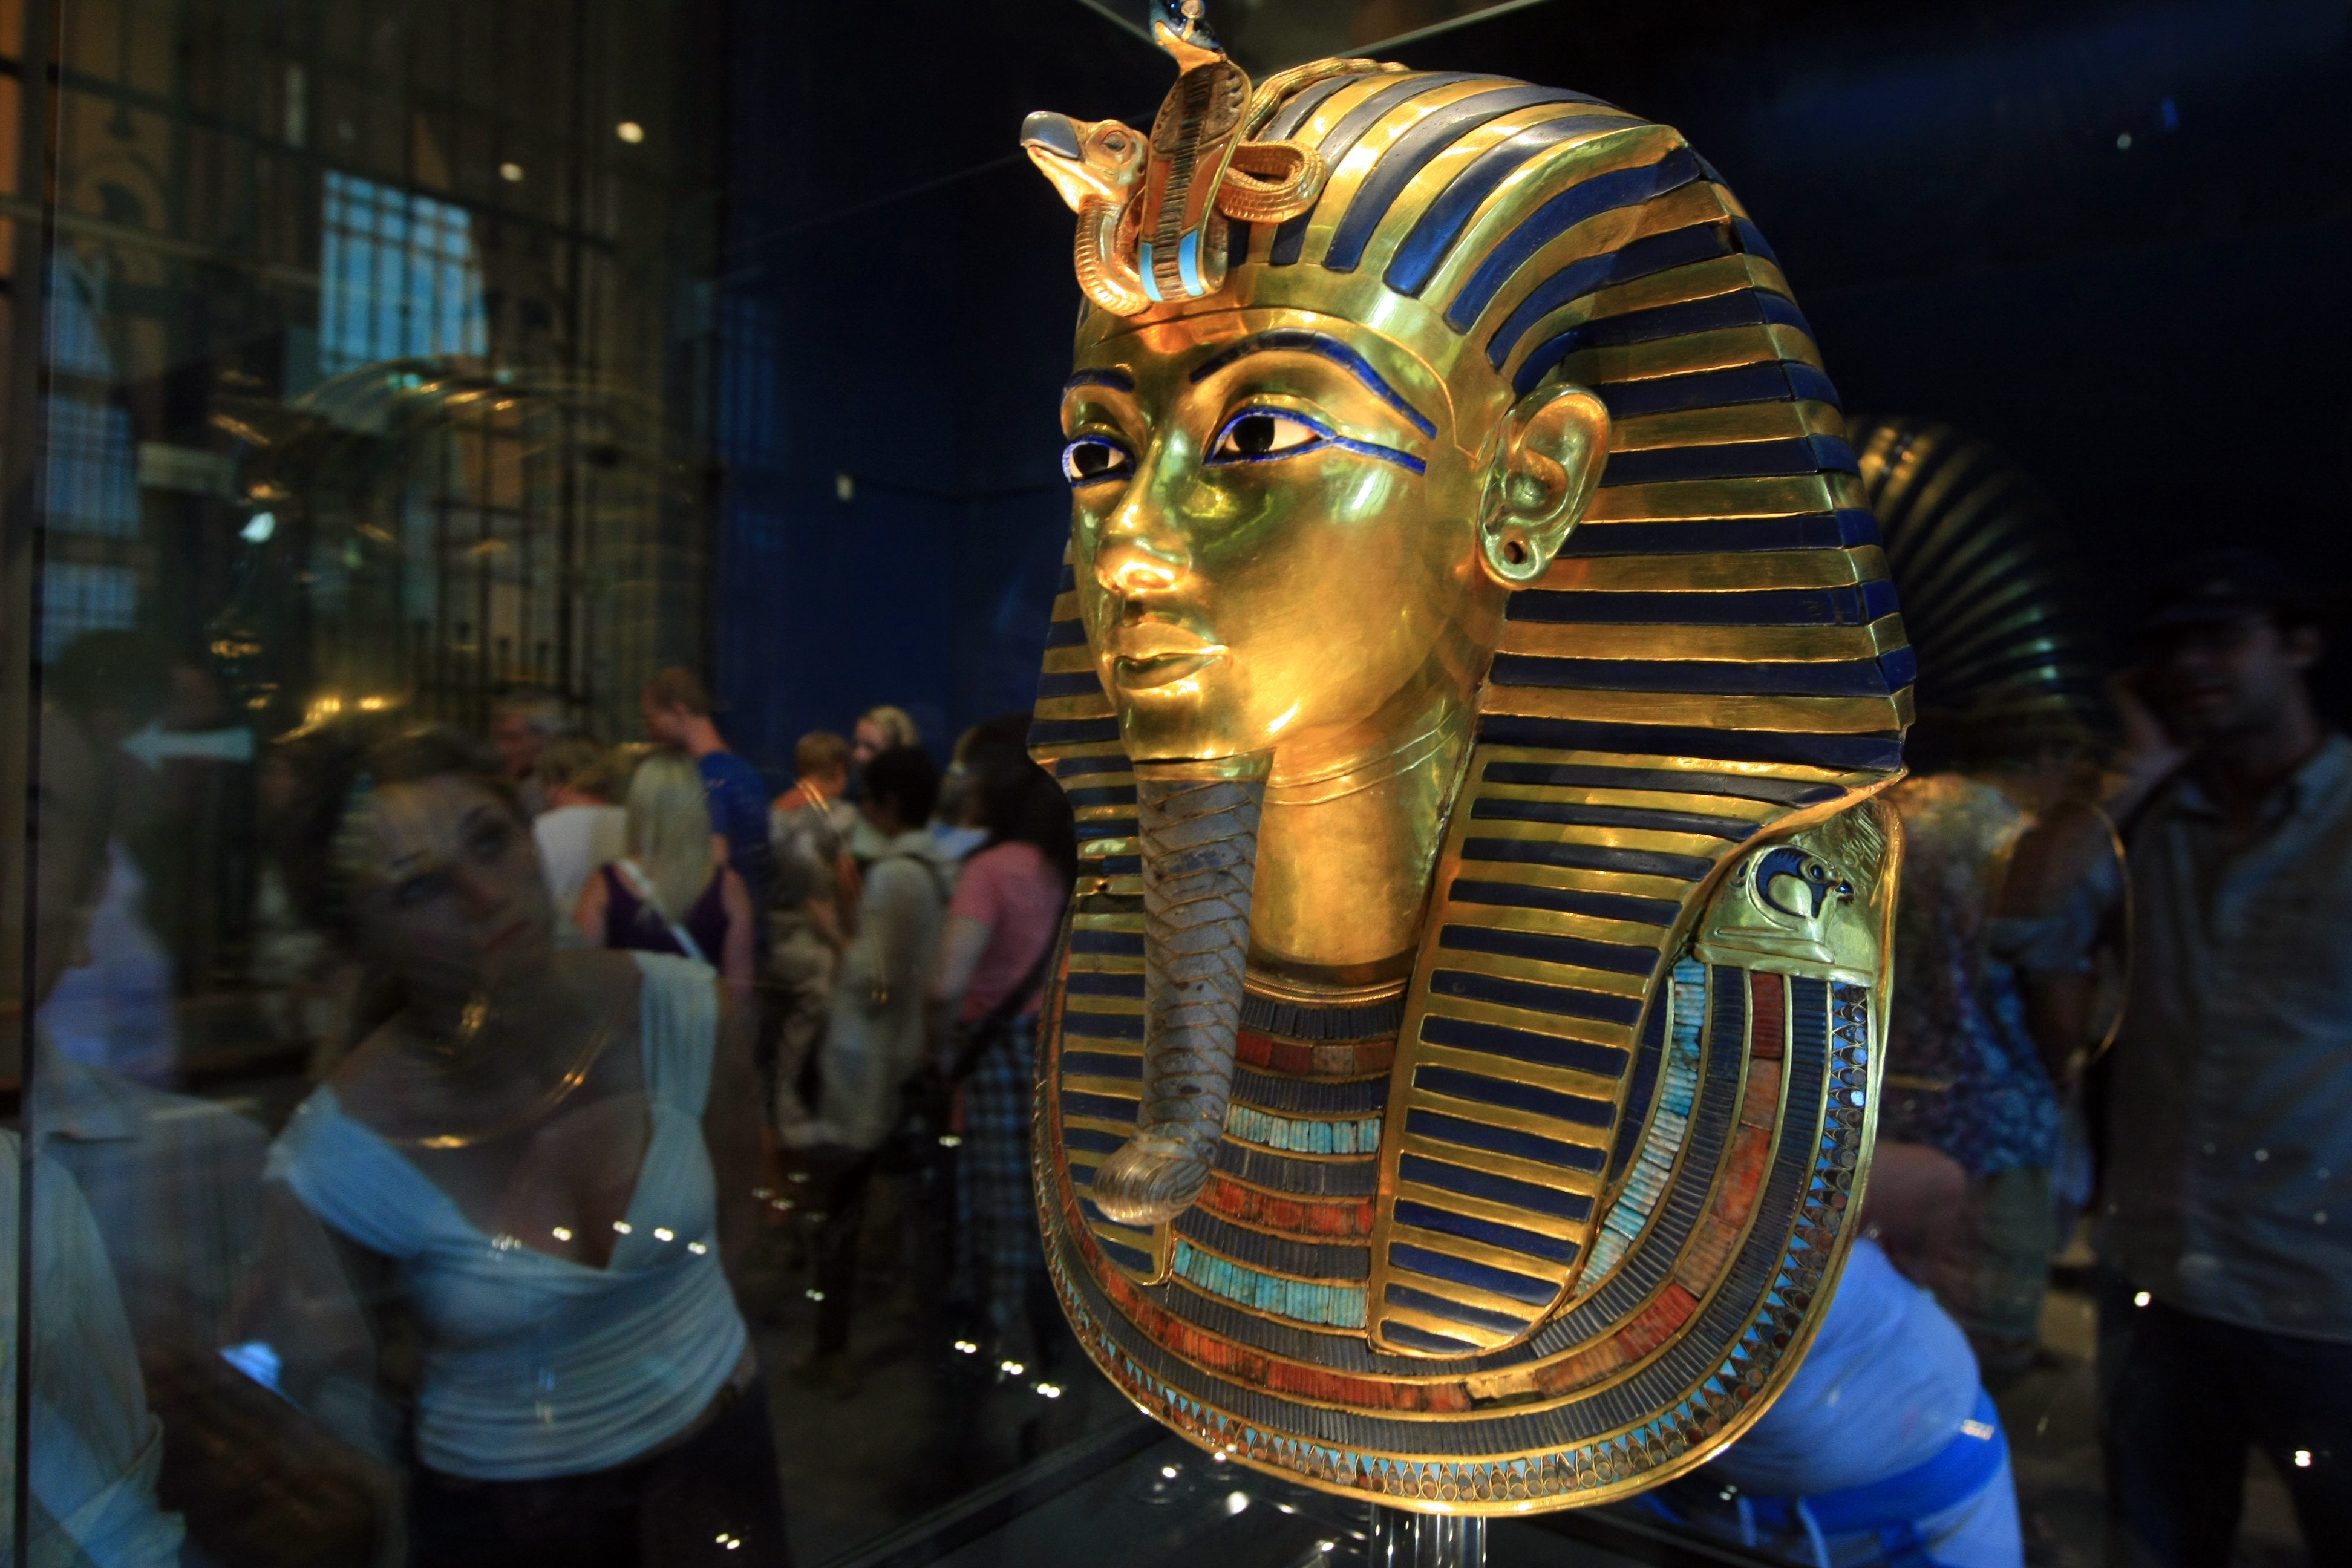 A picture taken on October 20, 2009 shows King Tutankhamun's golden mask displayed at the Egyptian museum in Cairo. (Khaled Desouki—AFP/Getty Images)